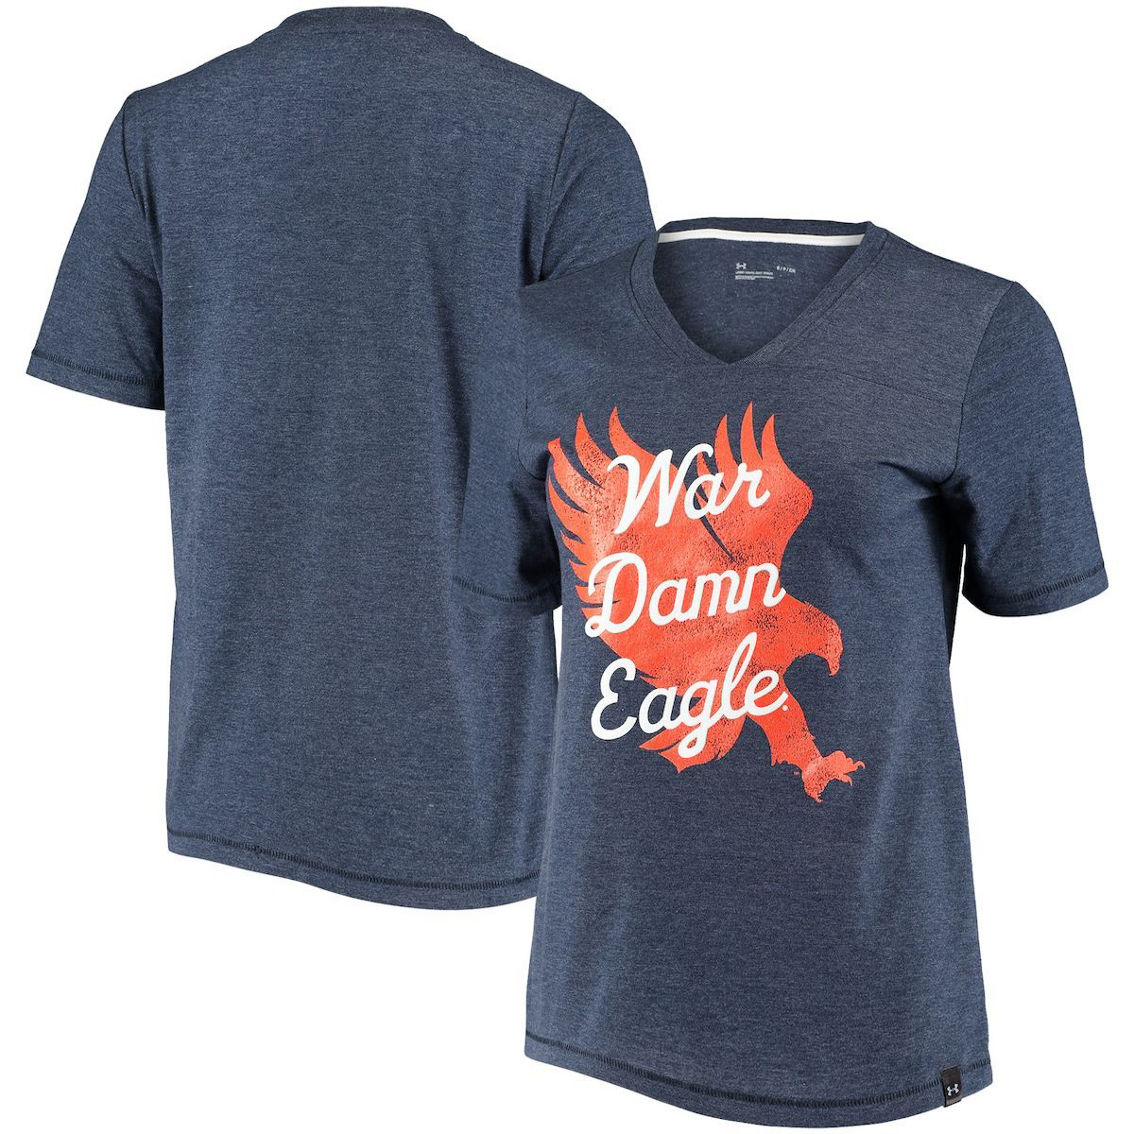 Under Armour Women's Heathered Navy Auburn Tigers V-Neck T-Shirt - Image 2 of 4